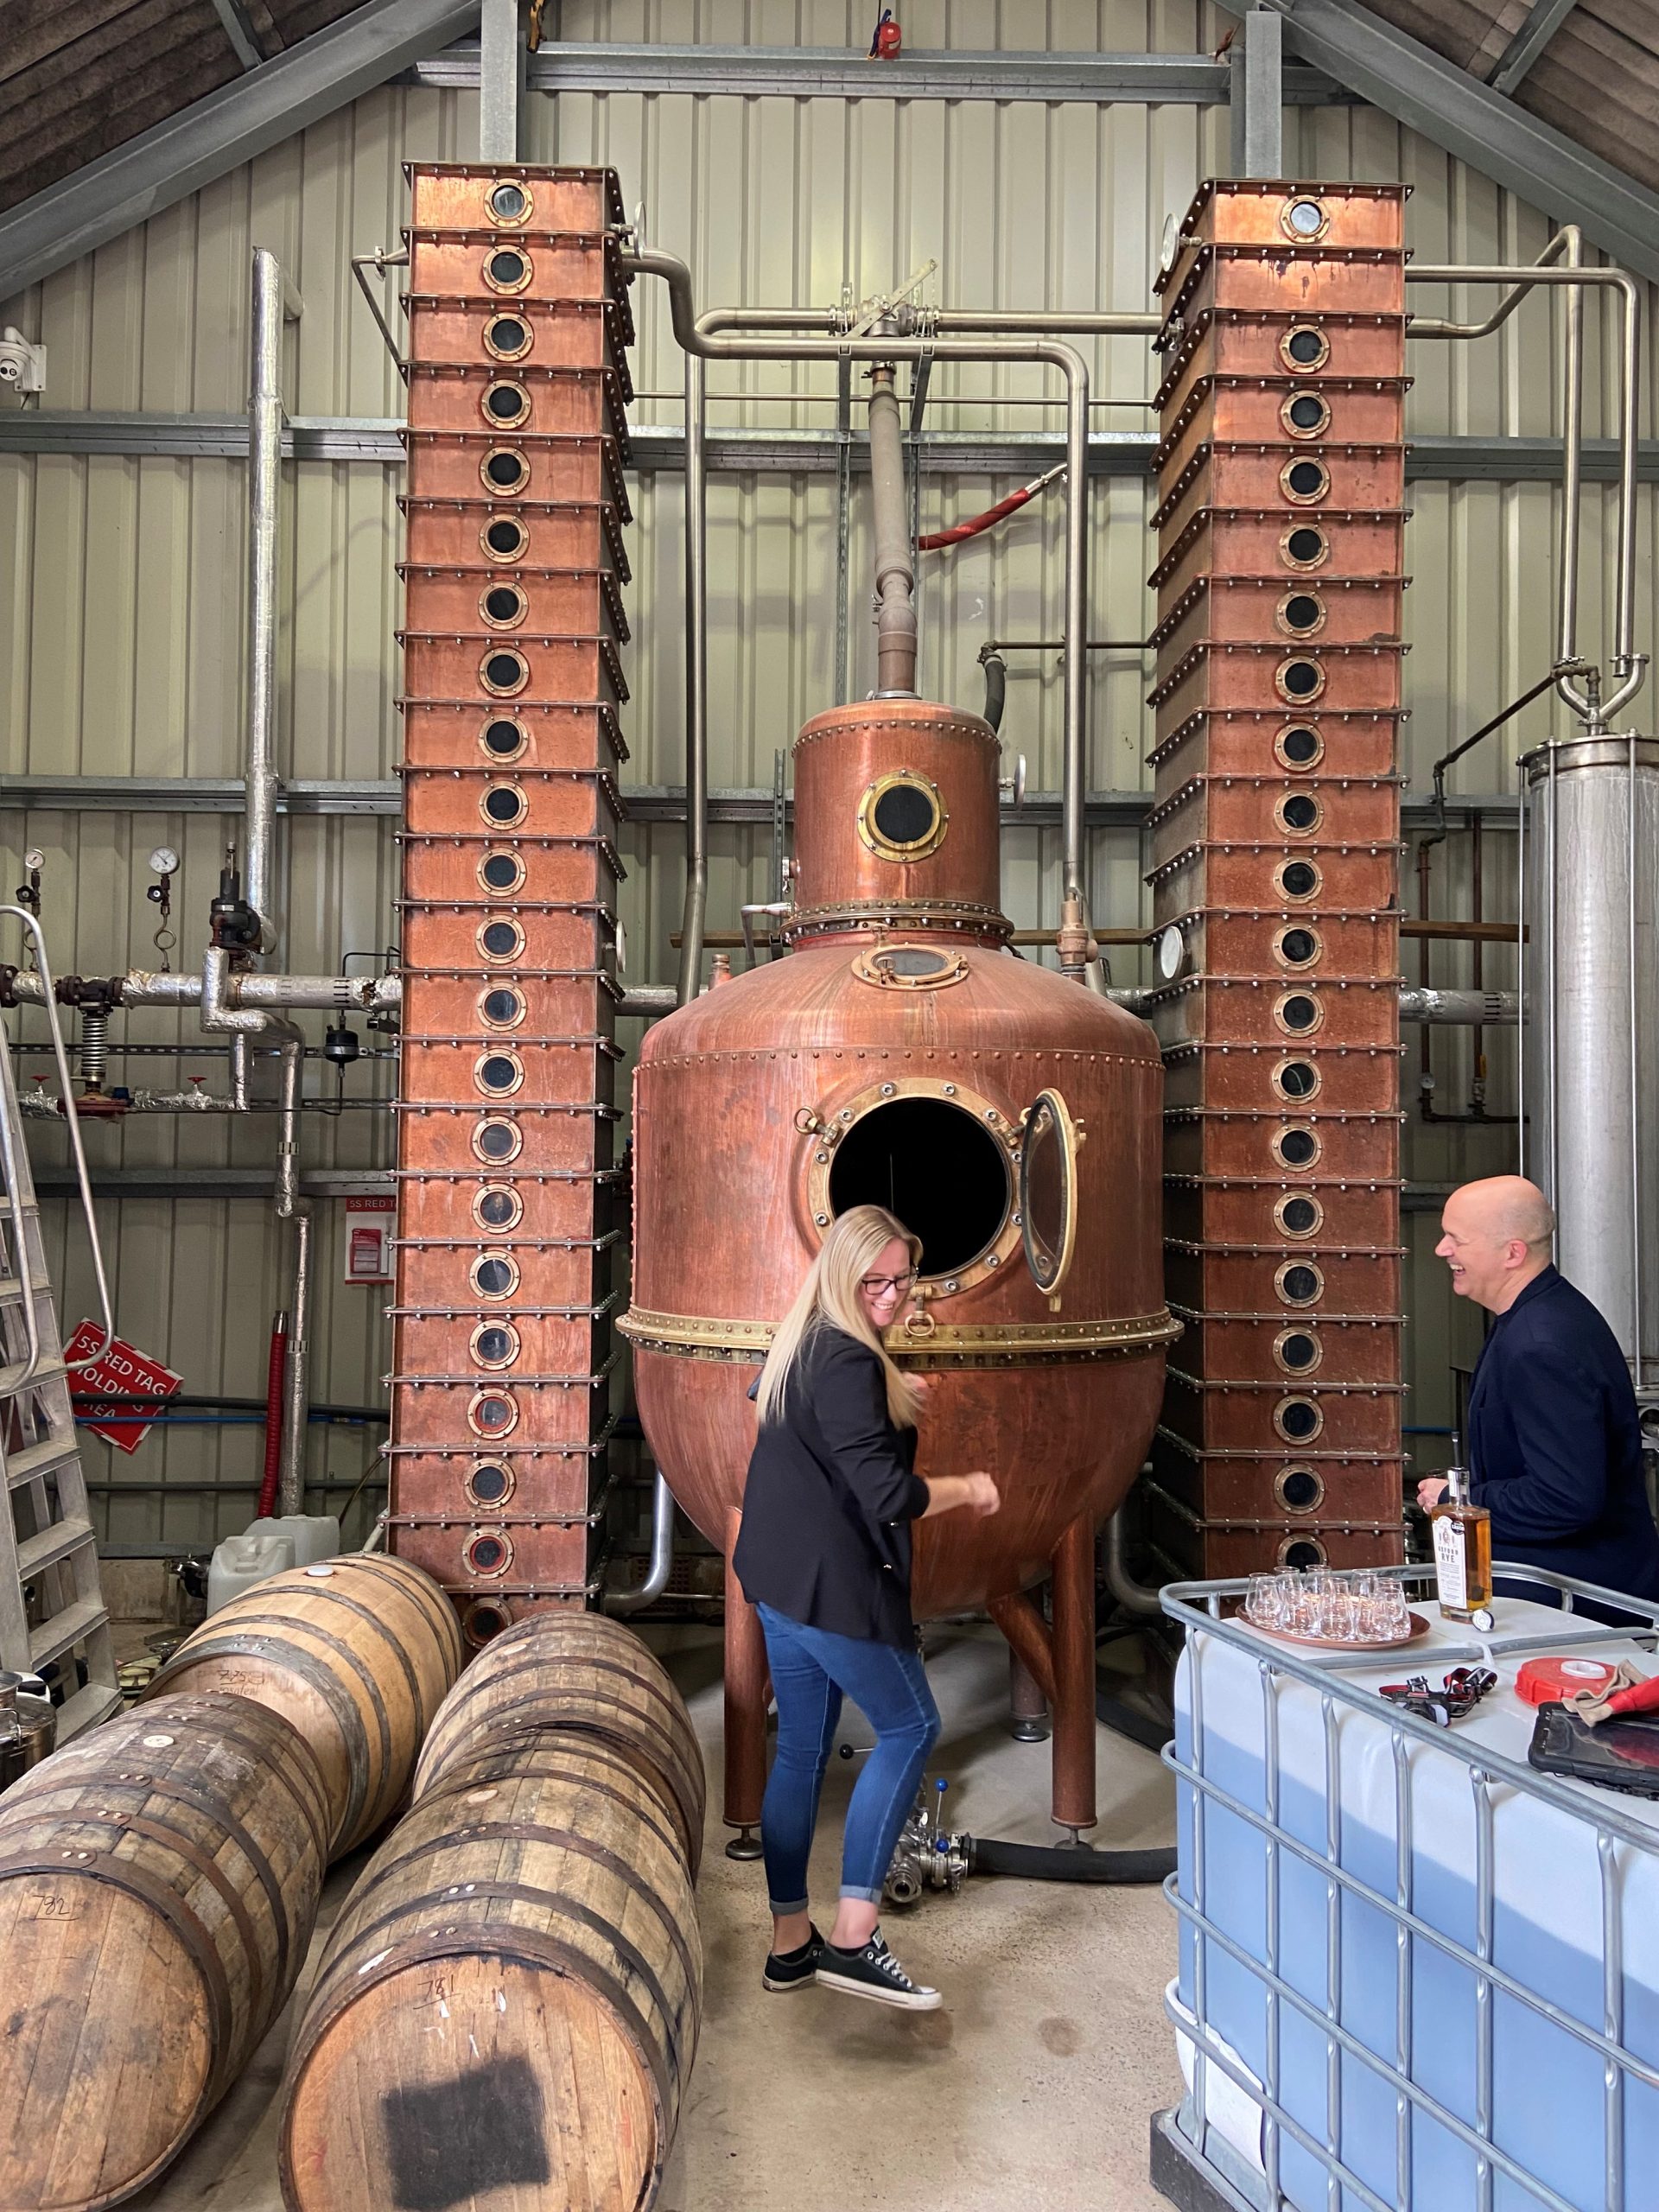 Explore the distillation process of locally made English spirits in Oxford